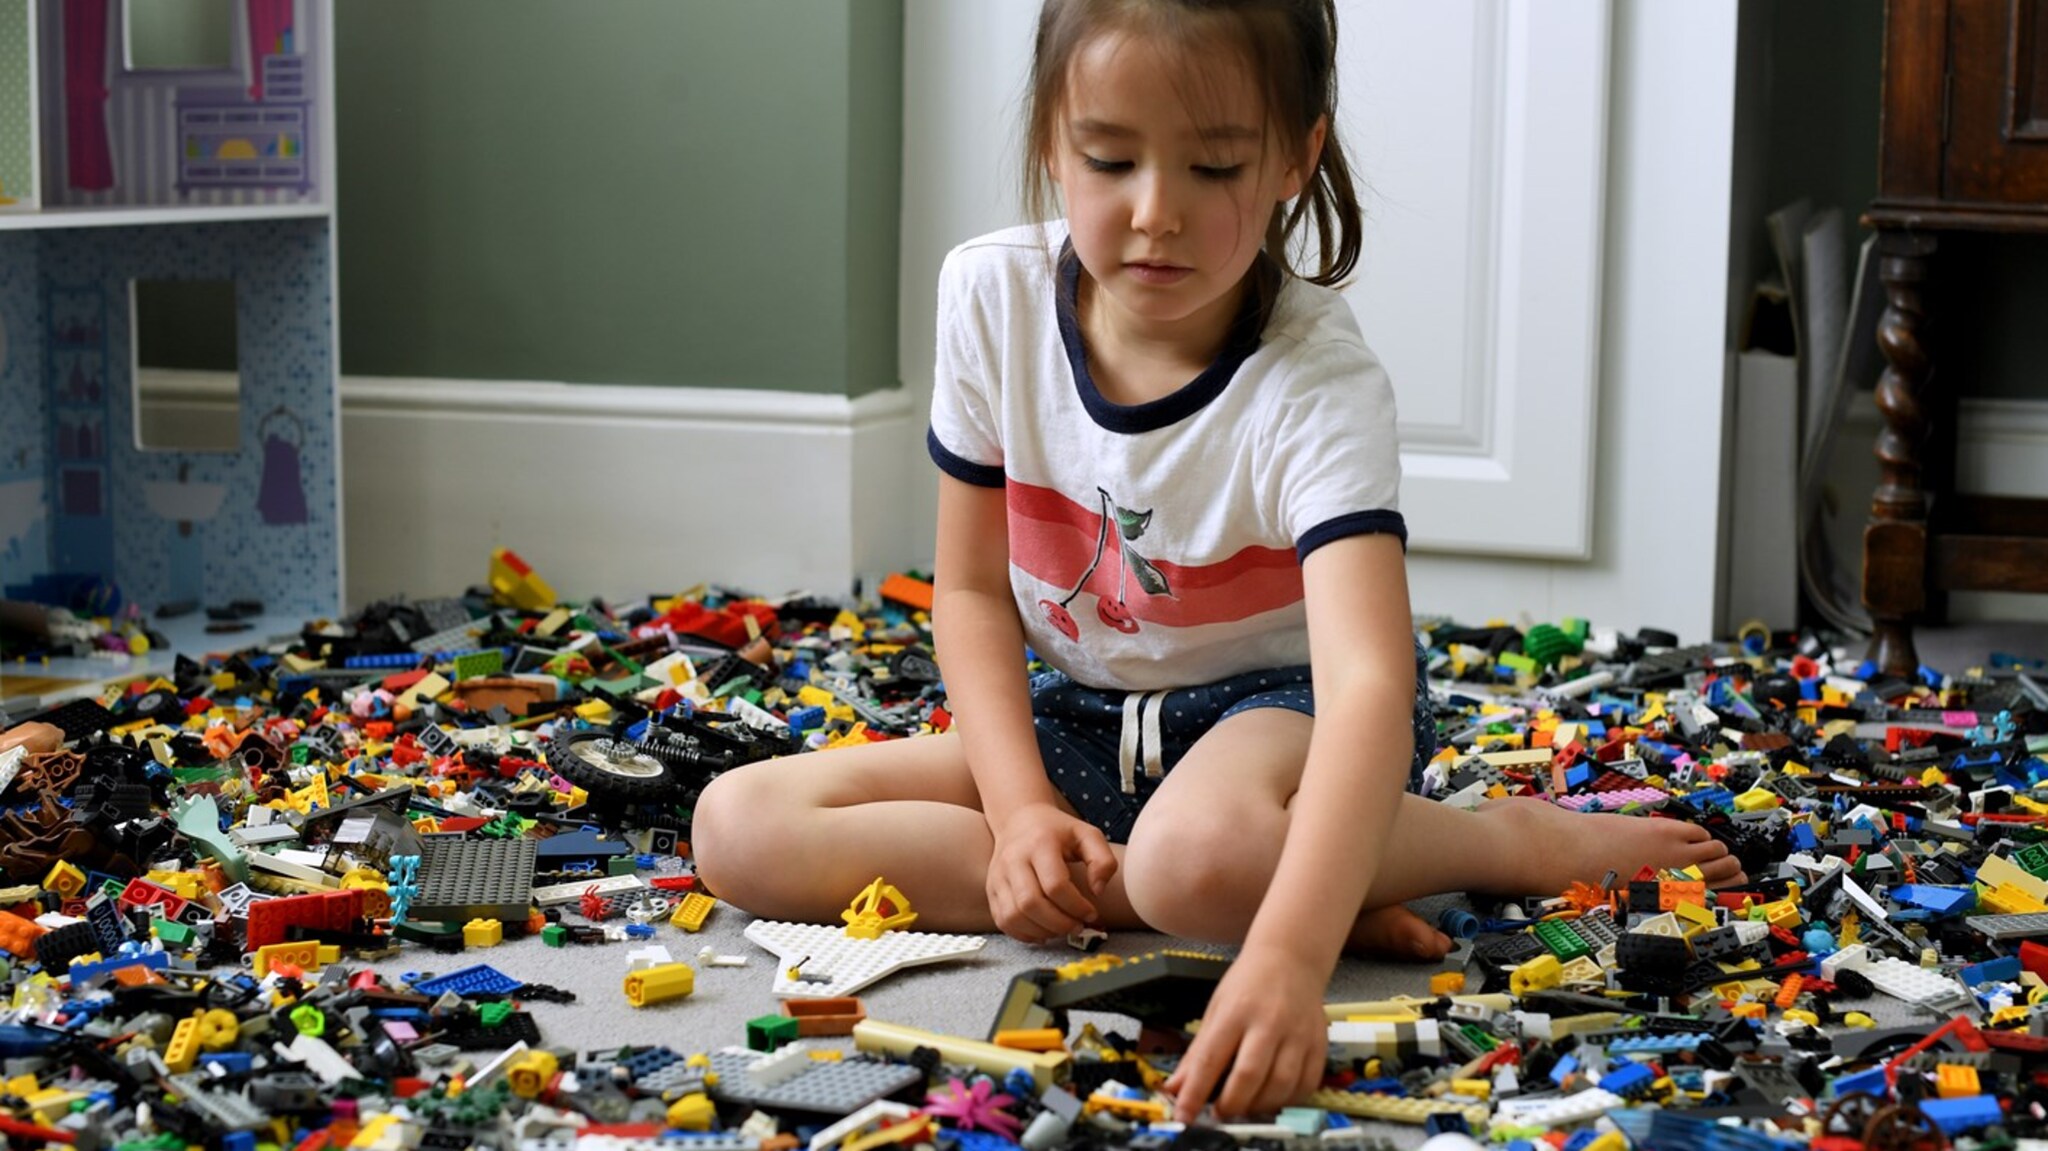 'Gender-neutral' Lego is now focused on toys for boys and girls